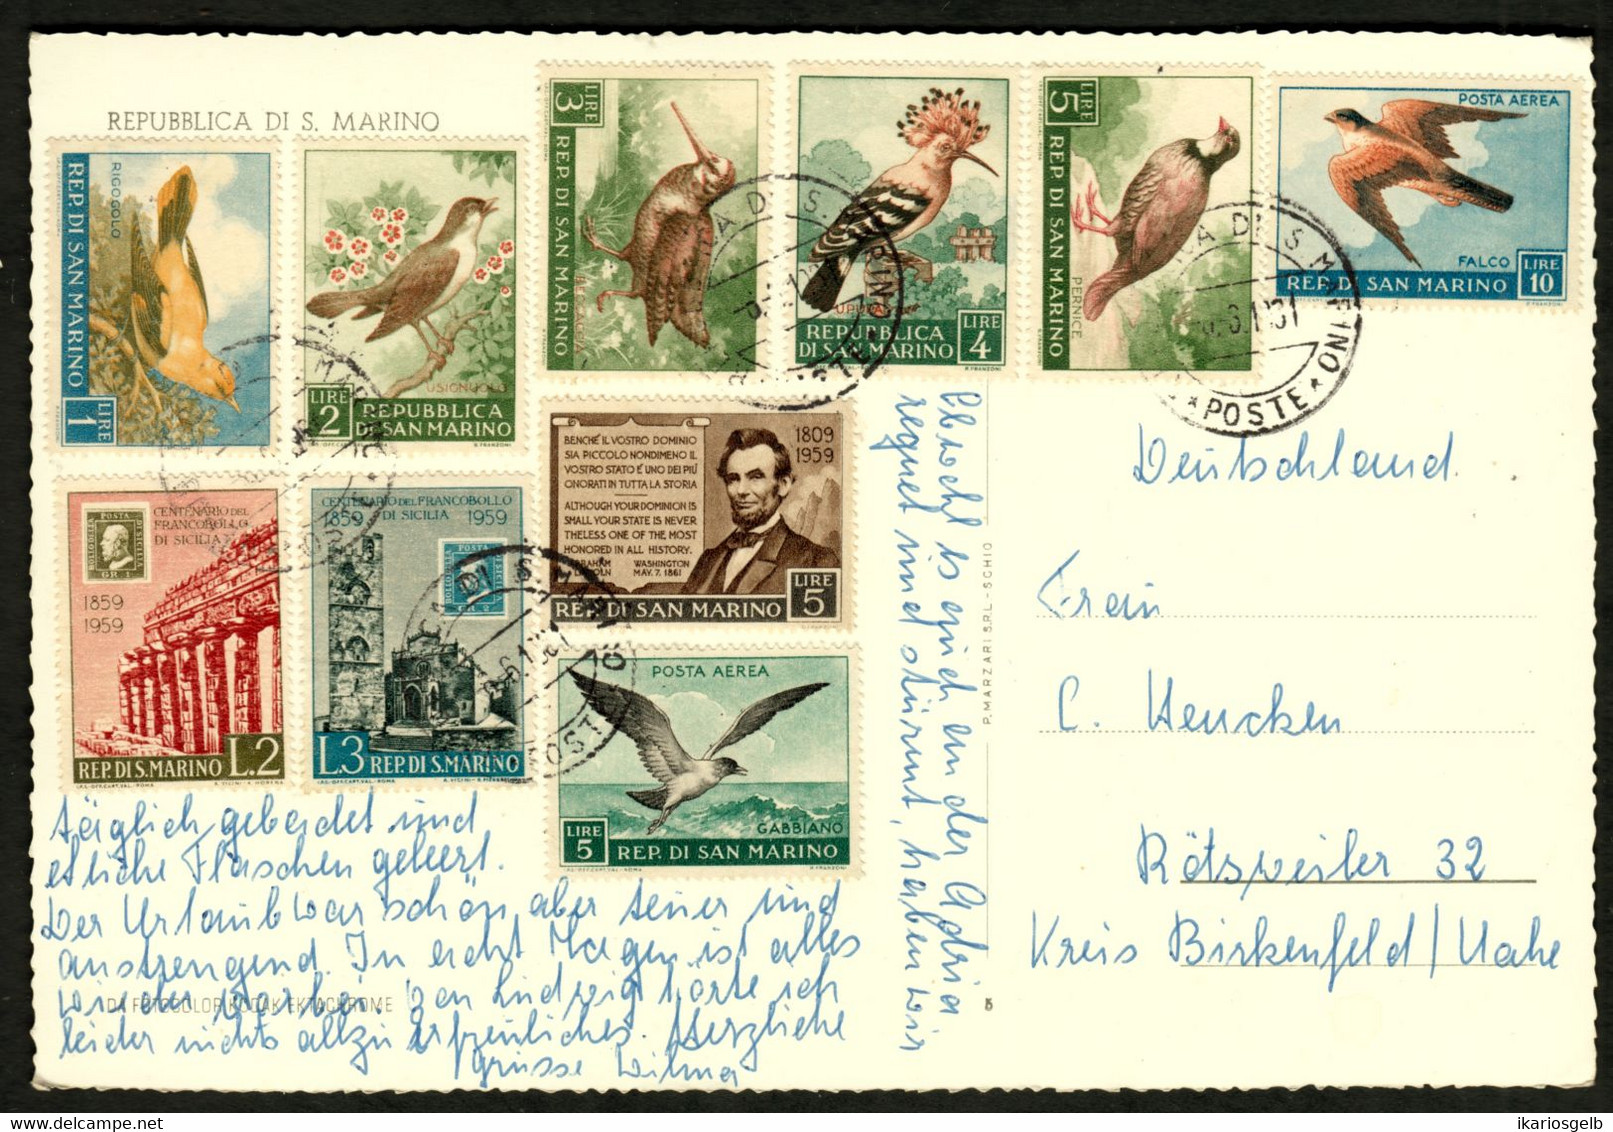 San Marino 1961 Postcard Deco Franked 10 Commemorative Stamps Real Used > Birkenfeld Retsweiler Germany A5 - Briefe U. Dokumente